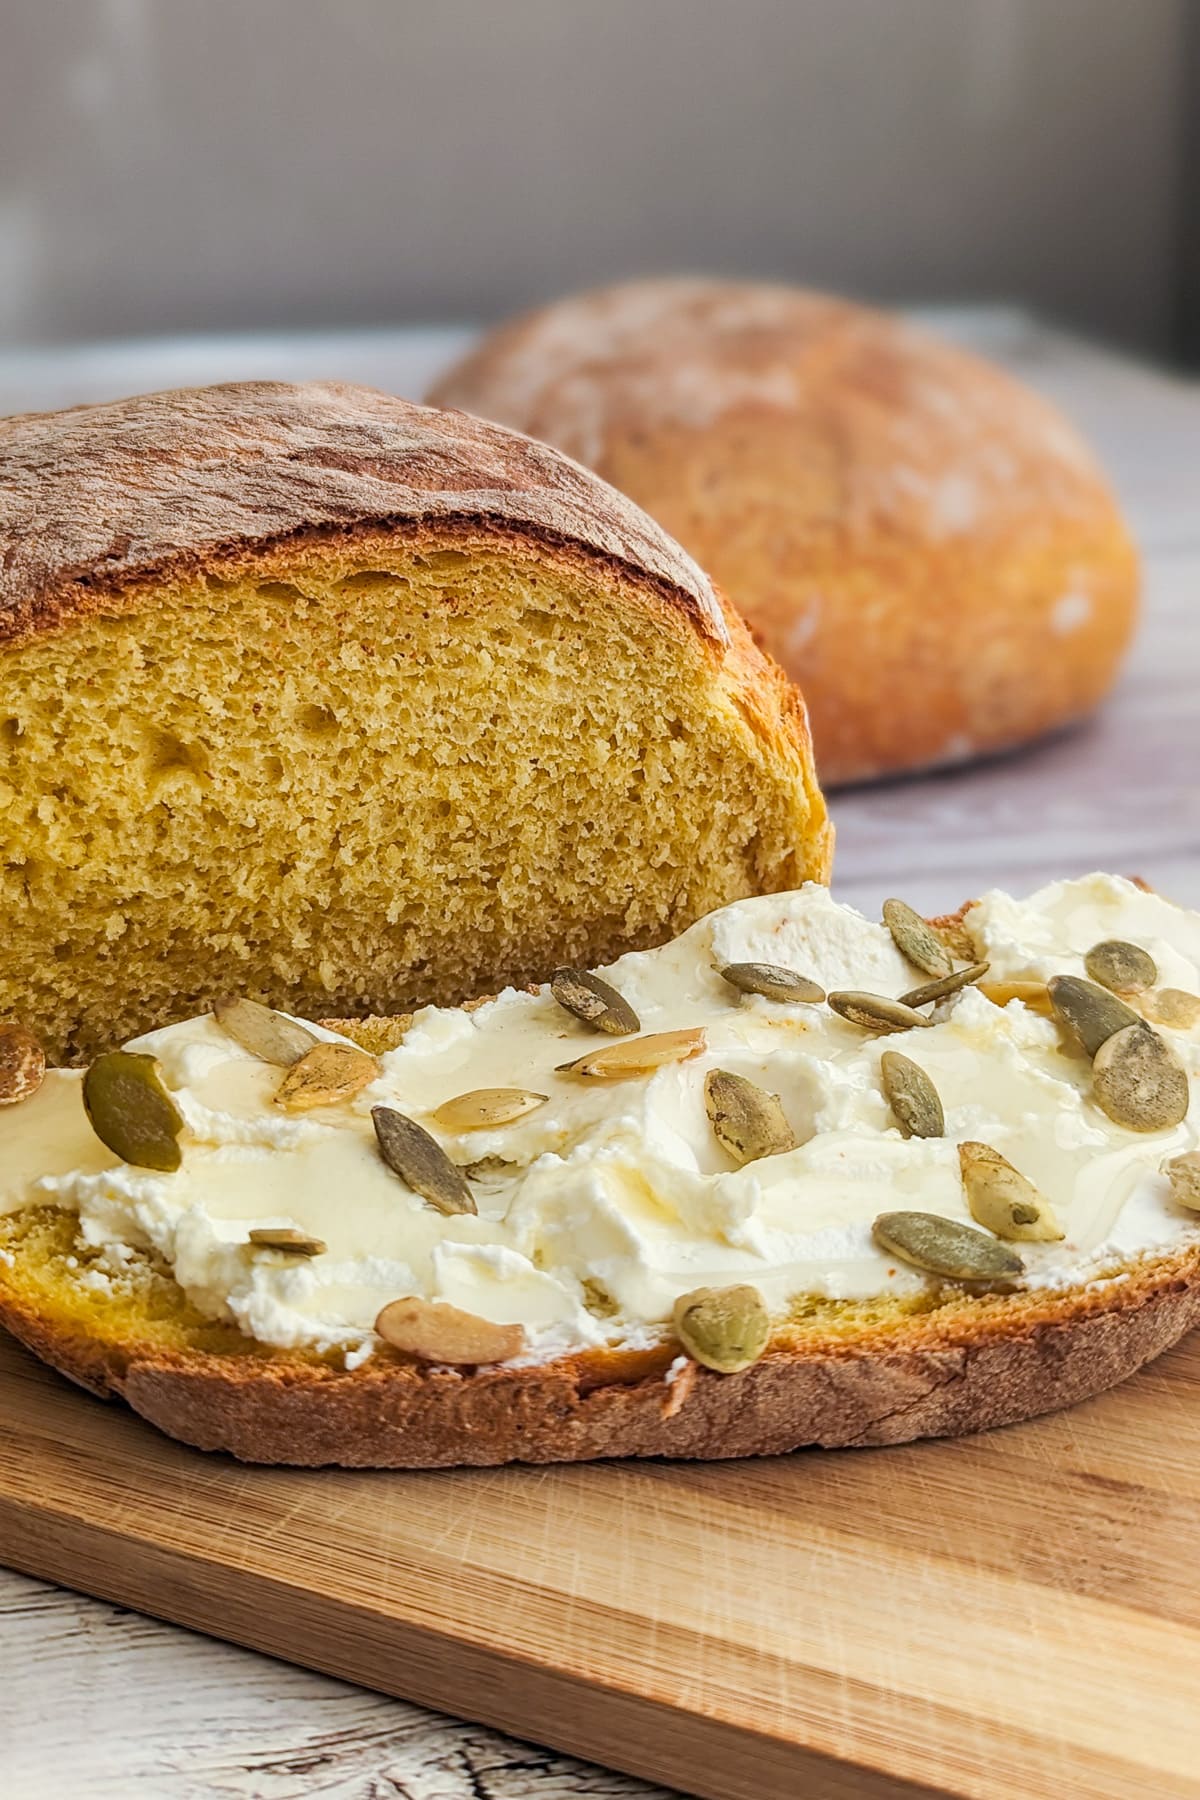 Slice of bread with cream cheese and pumpkin seeds on a wooden cutting board.